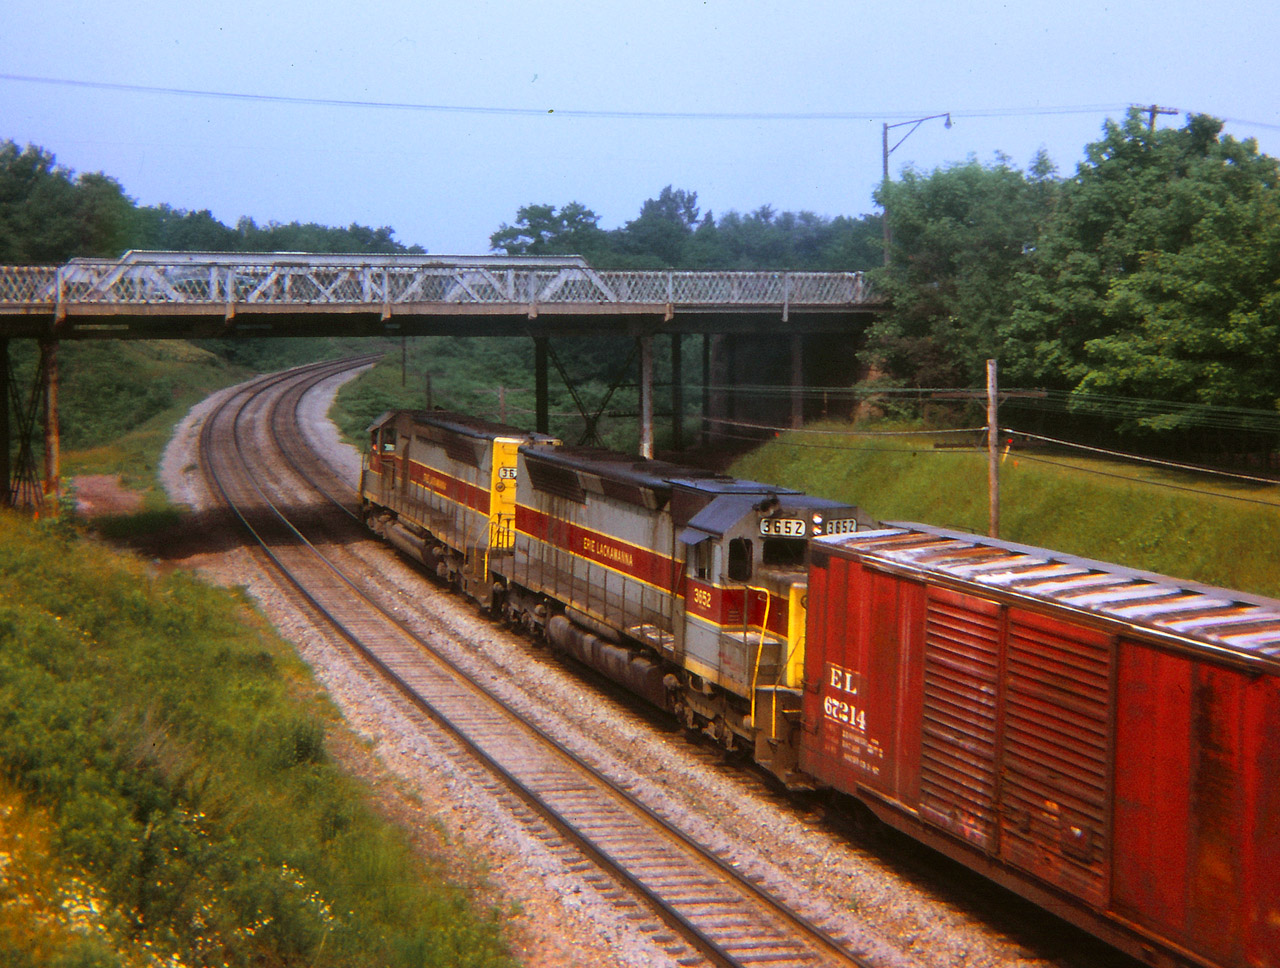 A view of a Erie Lackawanna detour train east bound on the CN Oakville sub. If I recall this train had departed from the TH&B and was heading east to perhaps Montreal for routing back to the USA. It was a busy time for the local railfans.  Another "Kodak Instamatic Moment" from long ago.